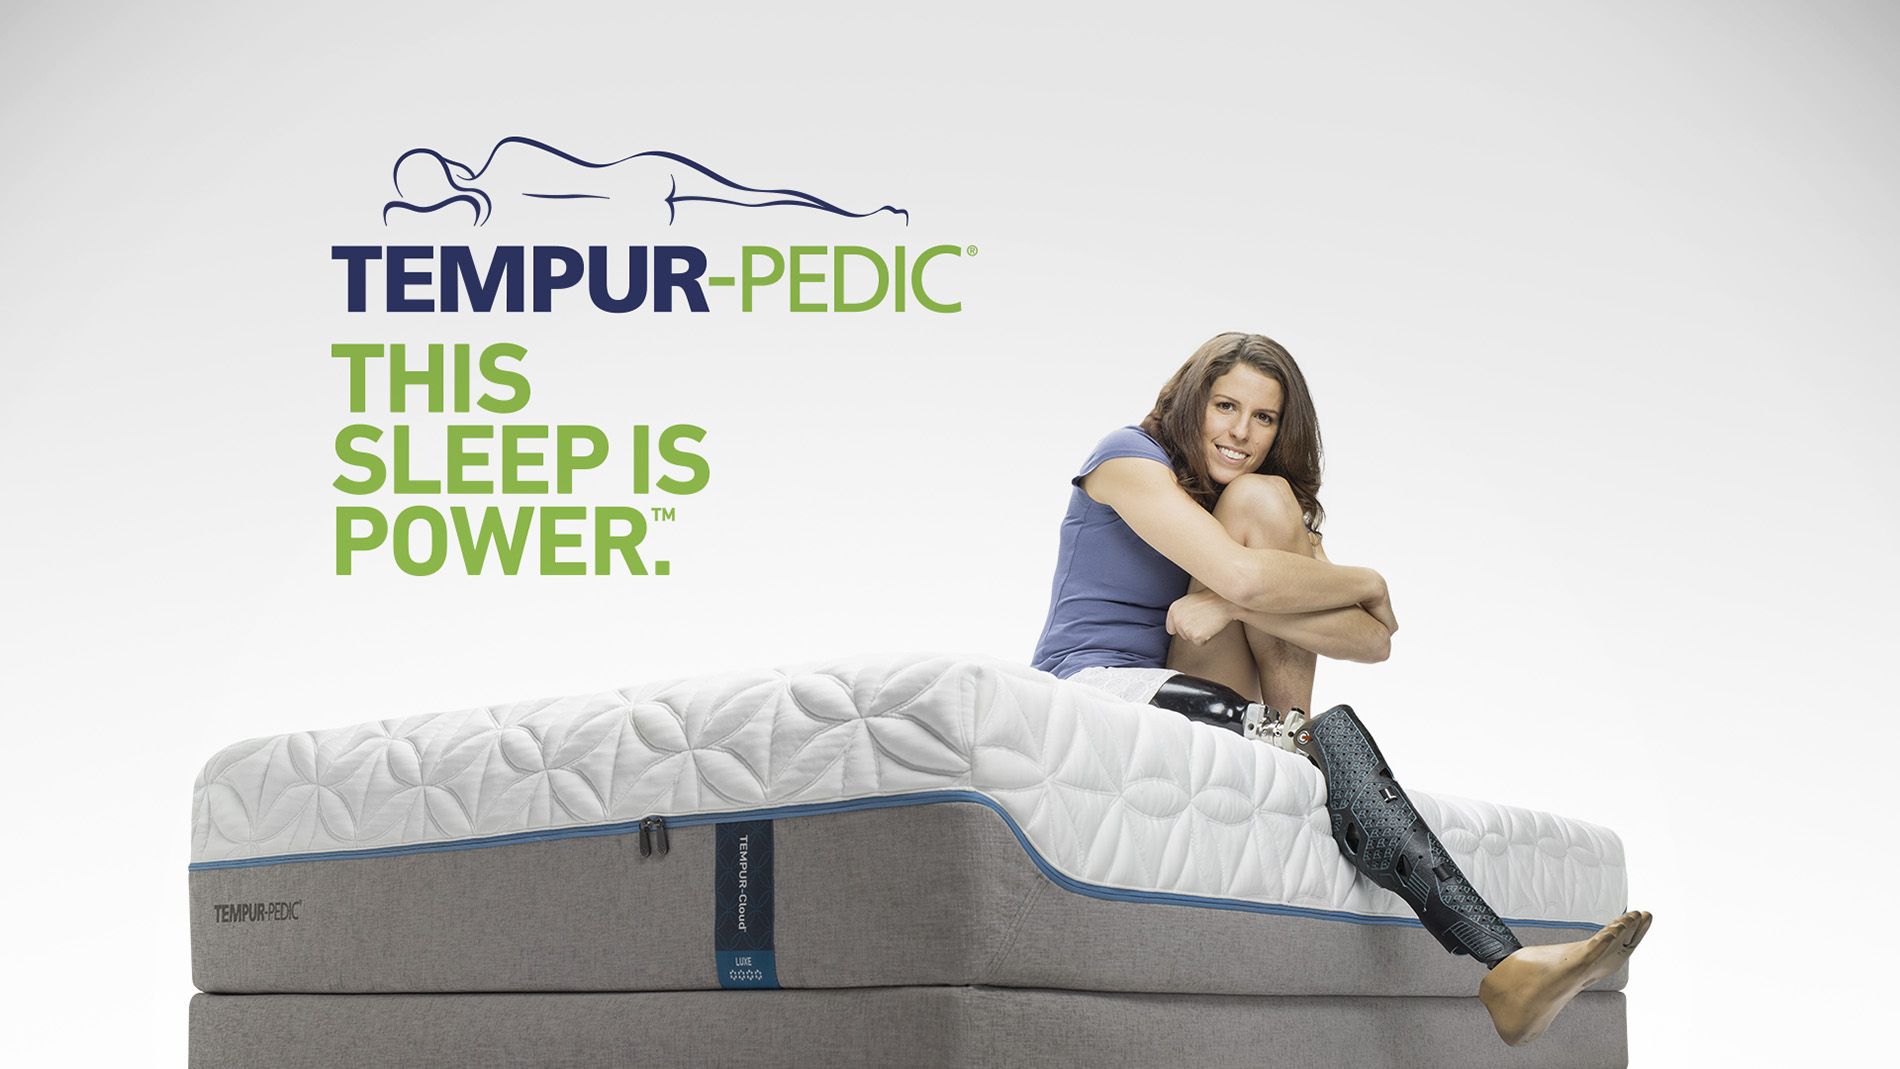 Michelle Salt, a Paralympian, realtor and speaker is featured in the “Tempur-Pedic Sleep Is Power” campaign where Tempur-Pedic owners share personal stories of the powerful effects that sleeping on a Tempur-Pedic has on their lives.